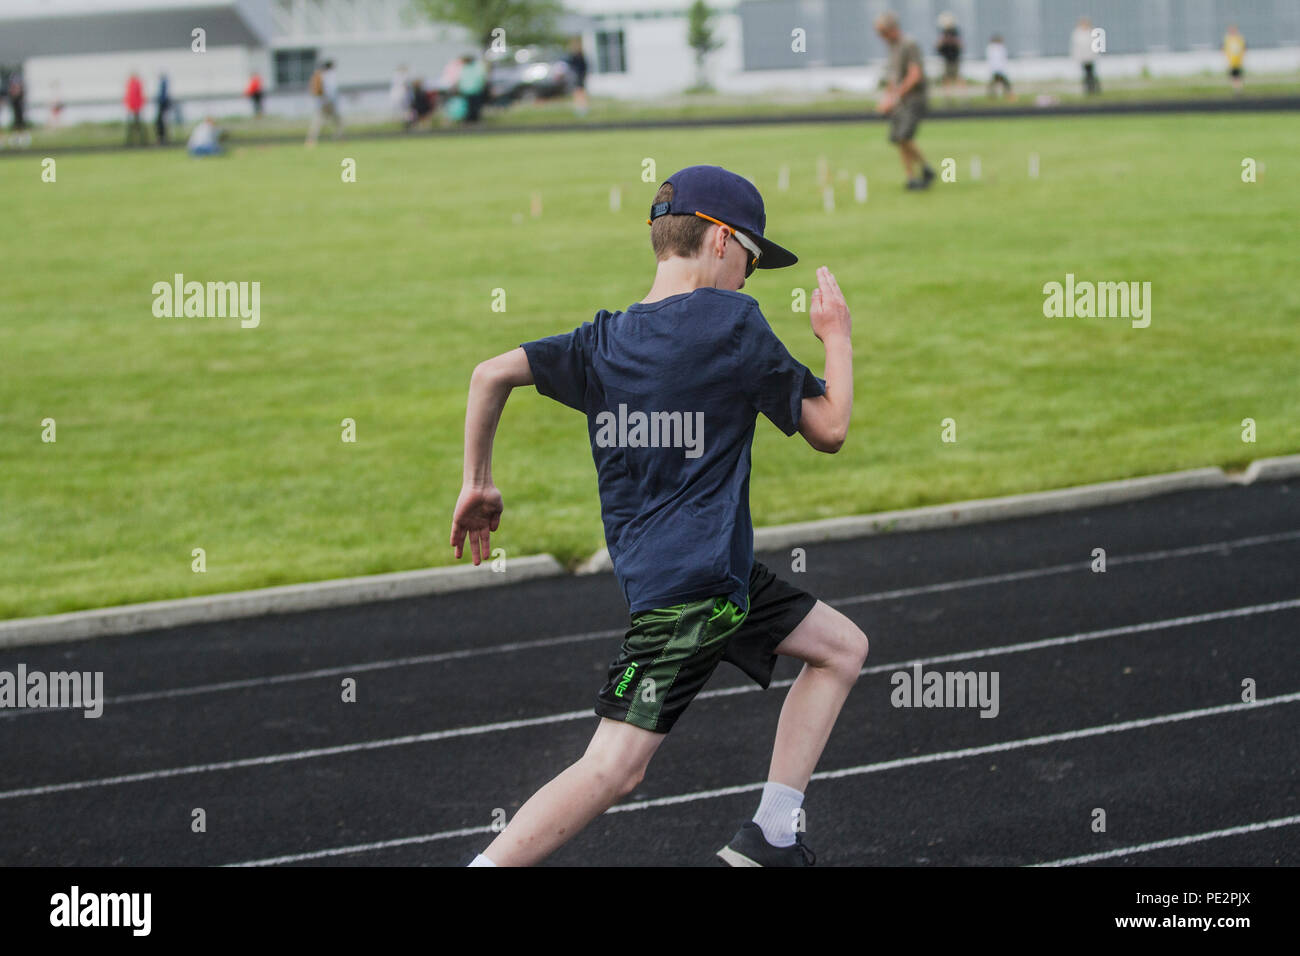 Young boy competing in track & field's, distance race, wearing shorts, t-shirt, hat and sunglasses.. Model released Stock Photo